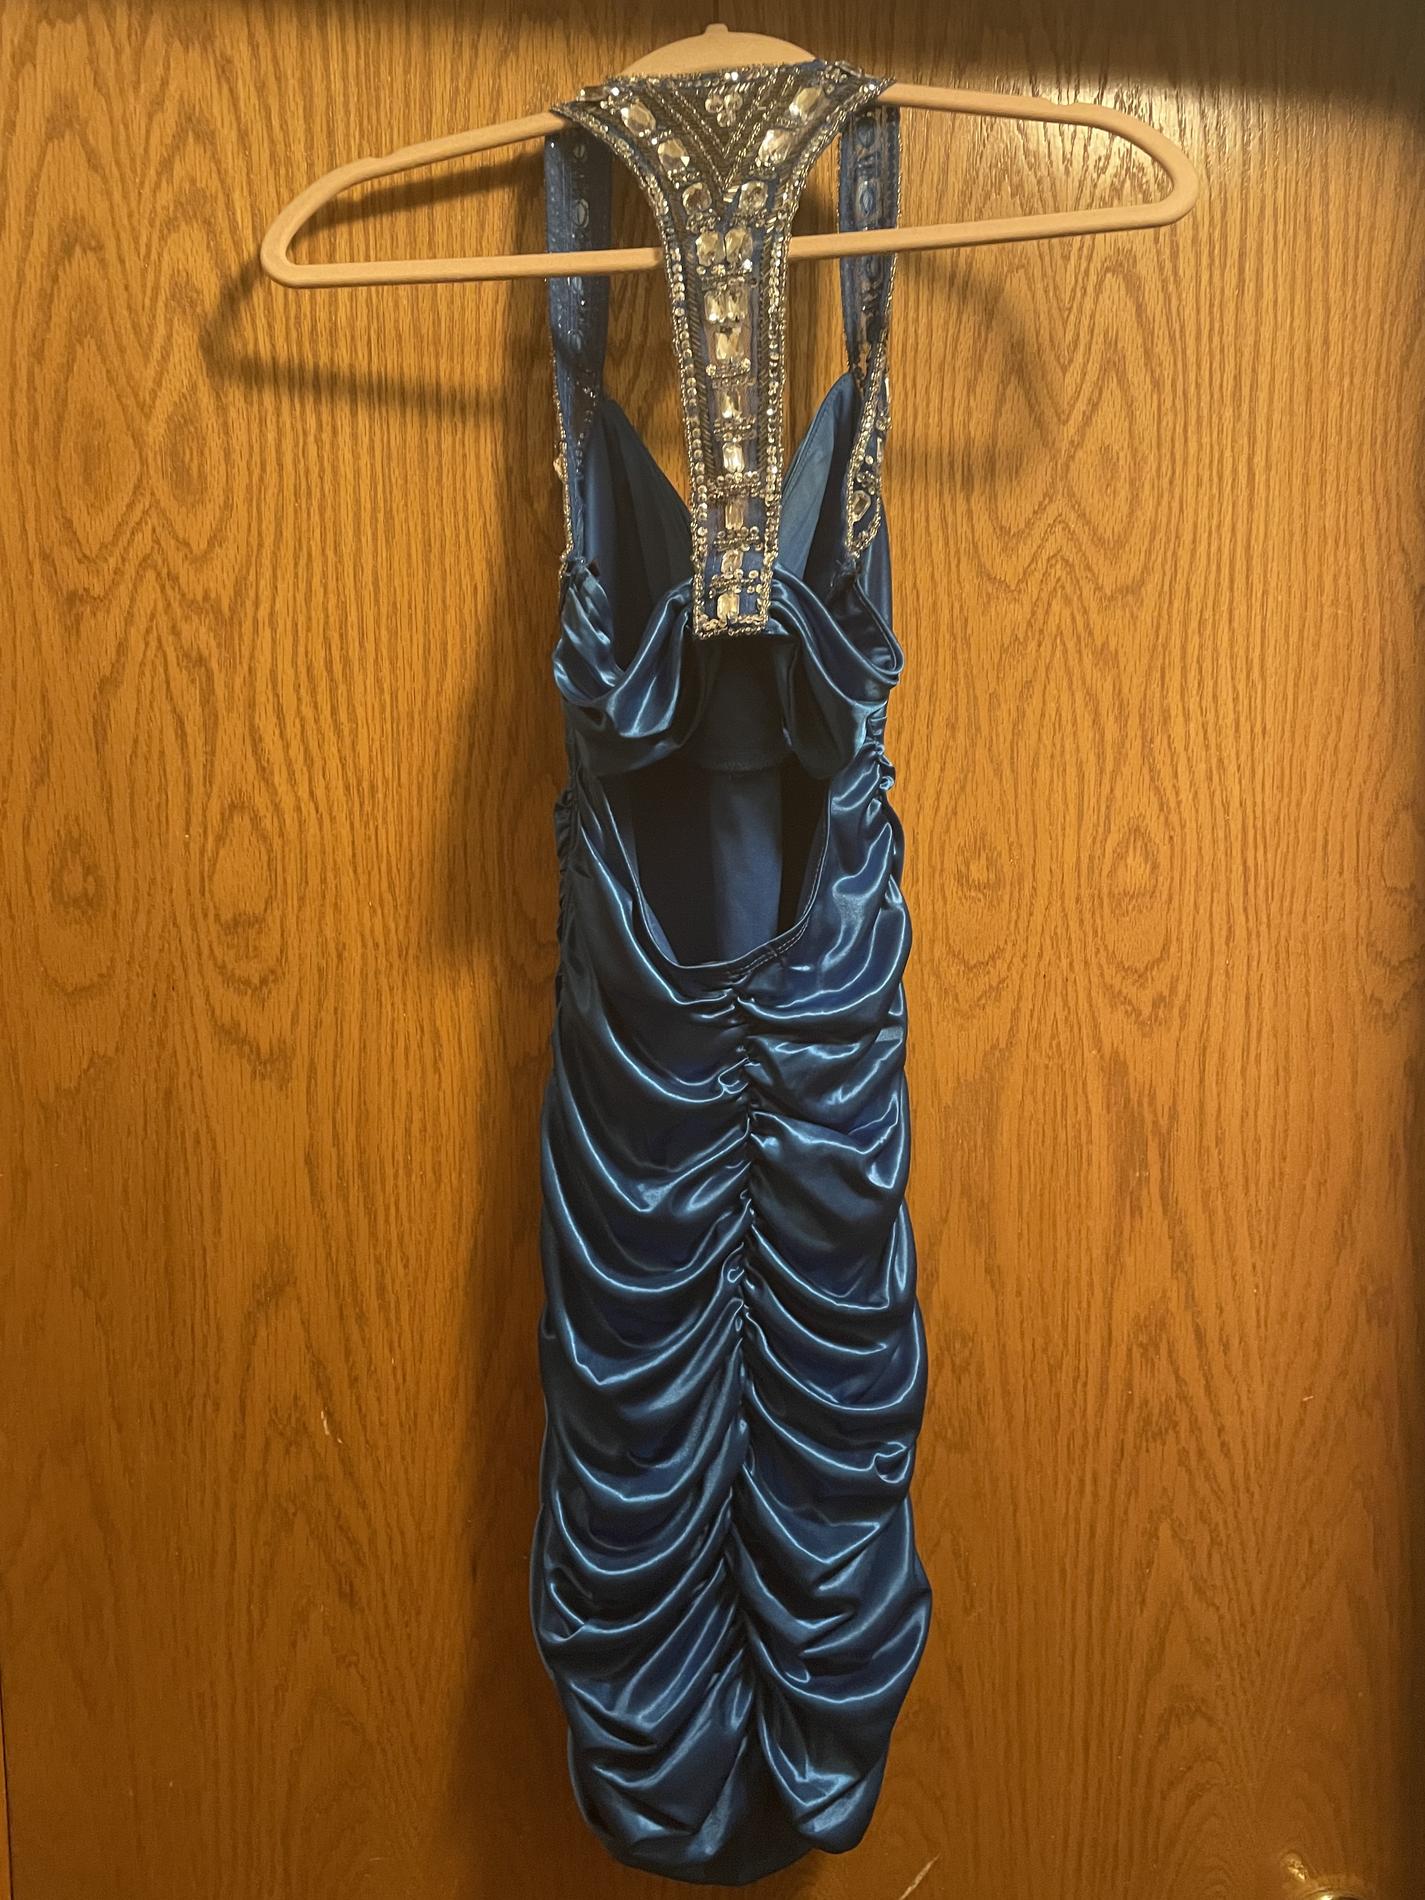 Size 2 Homecoming Sequined Blue Cocktail Dress on Queenly